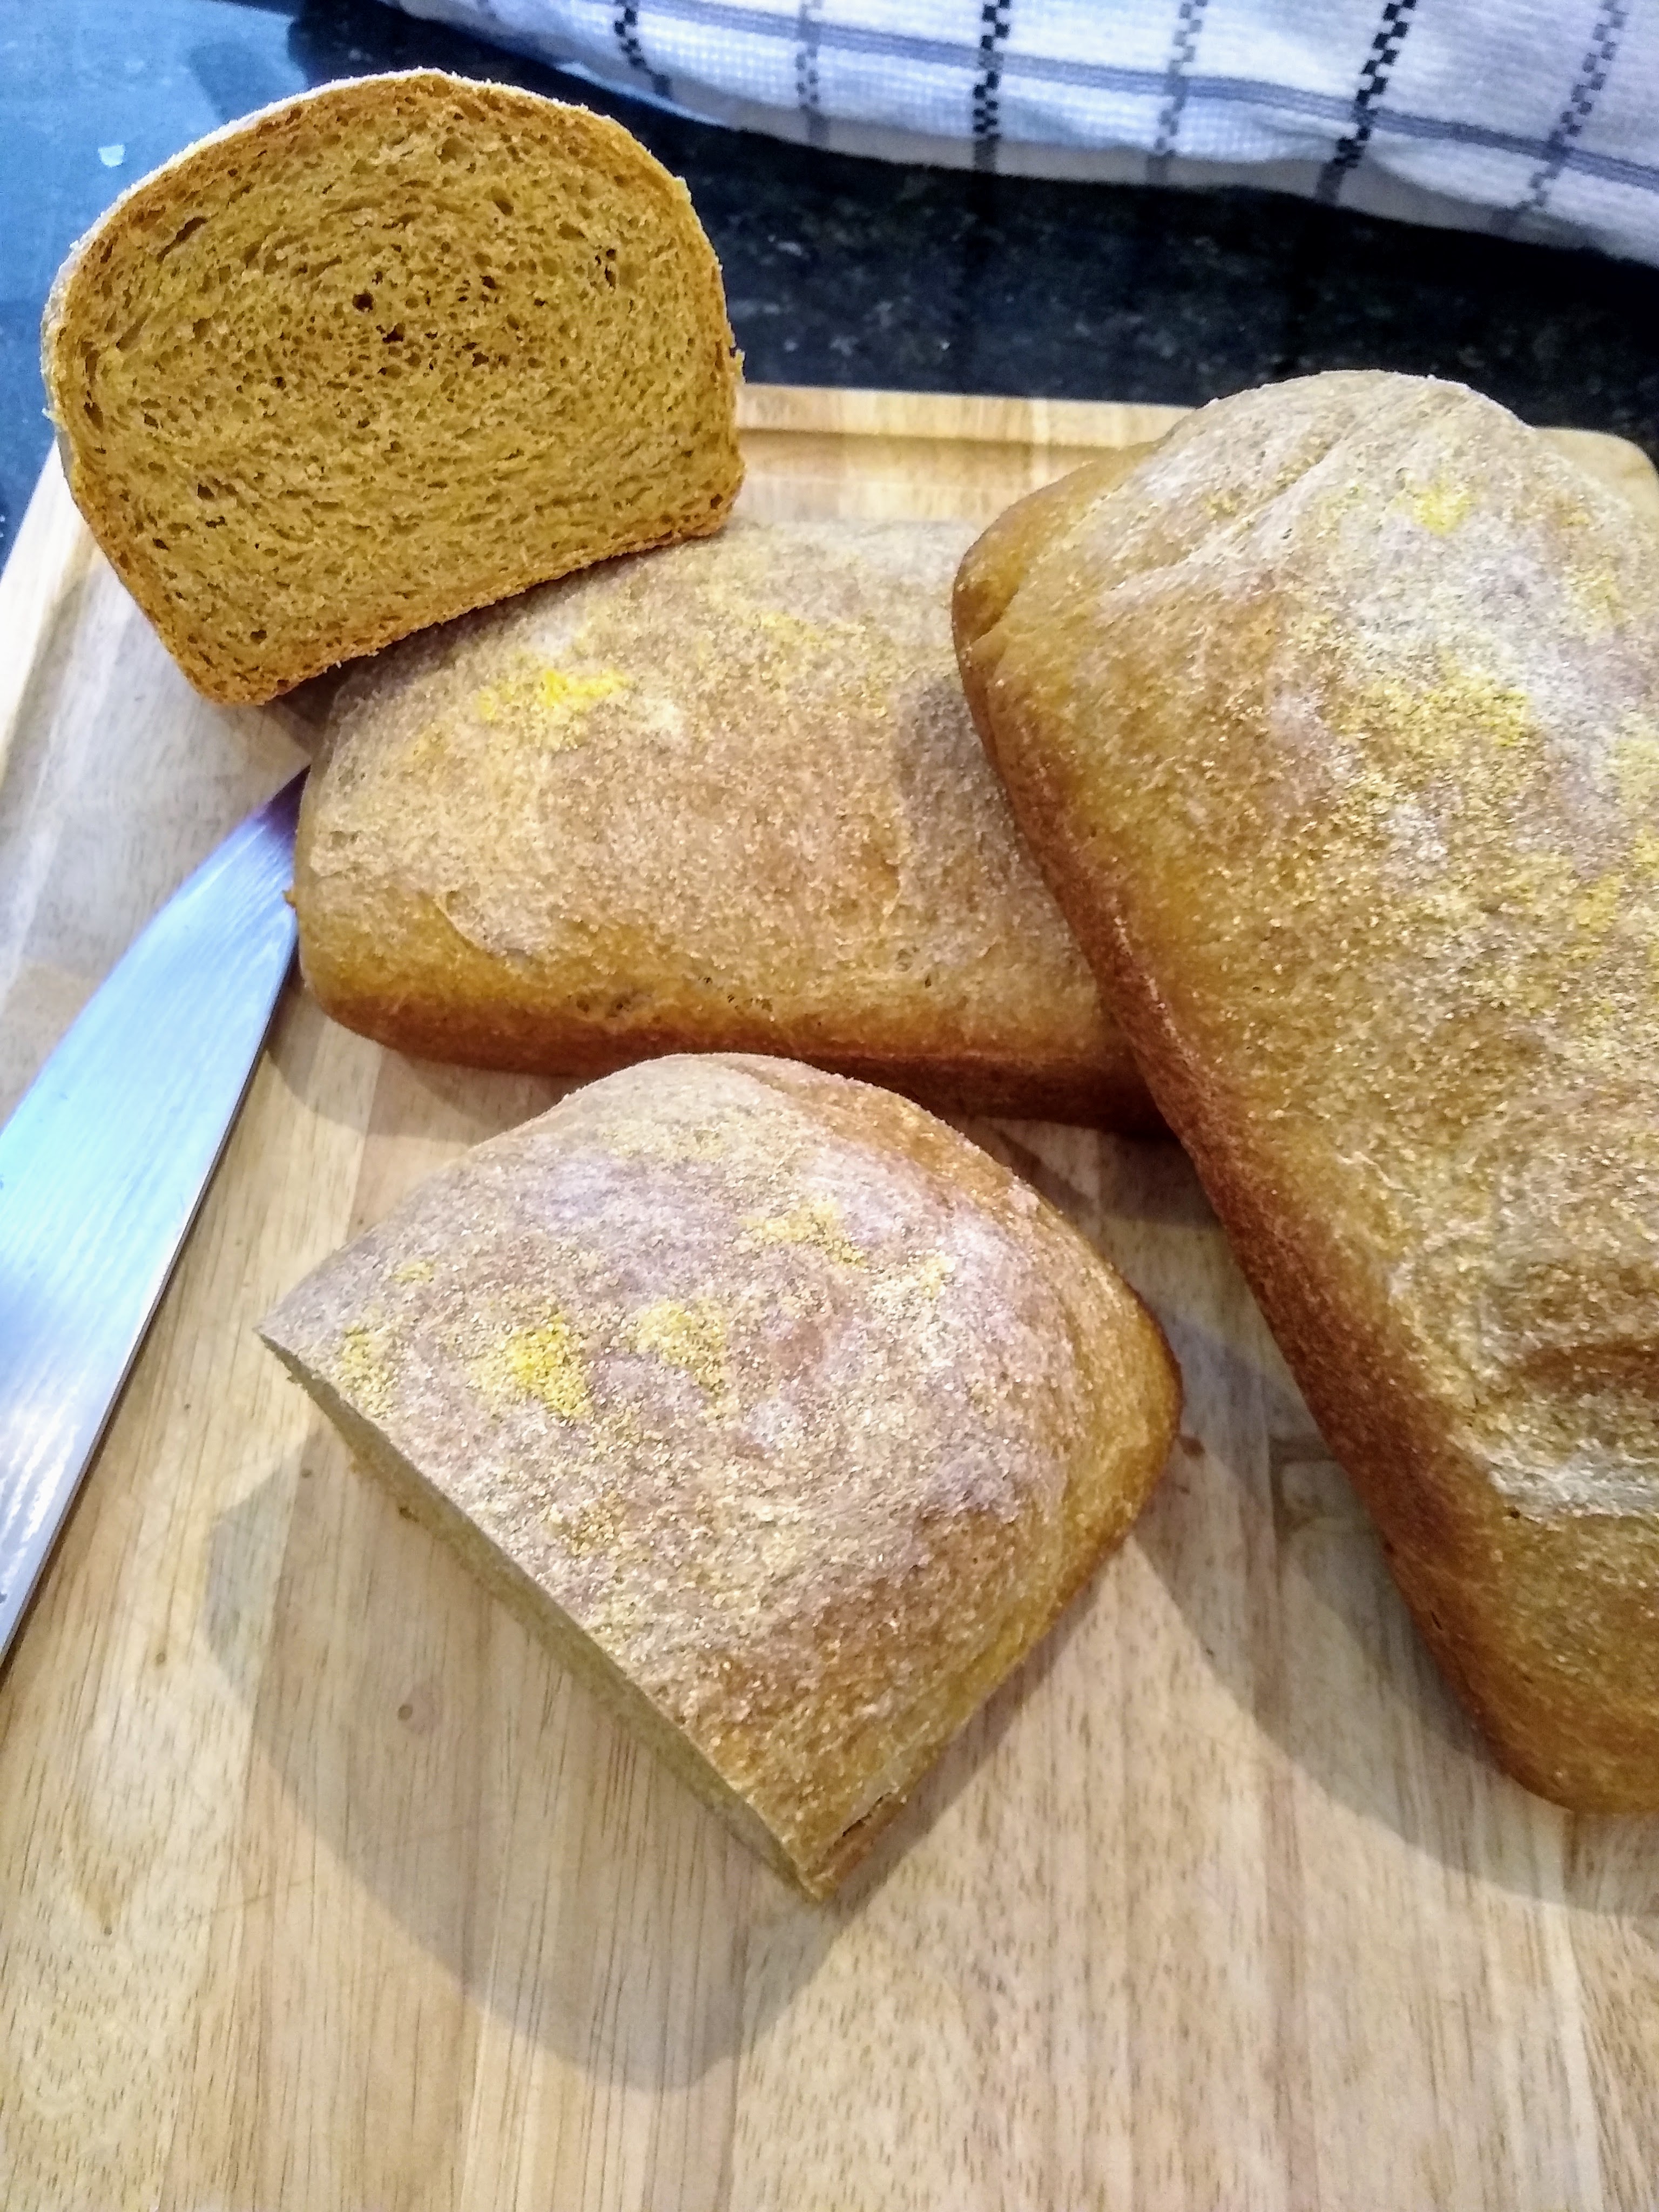 Completed anadama bread